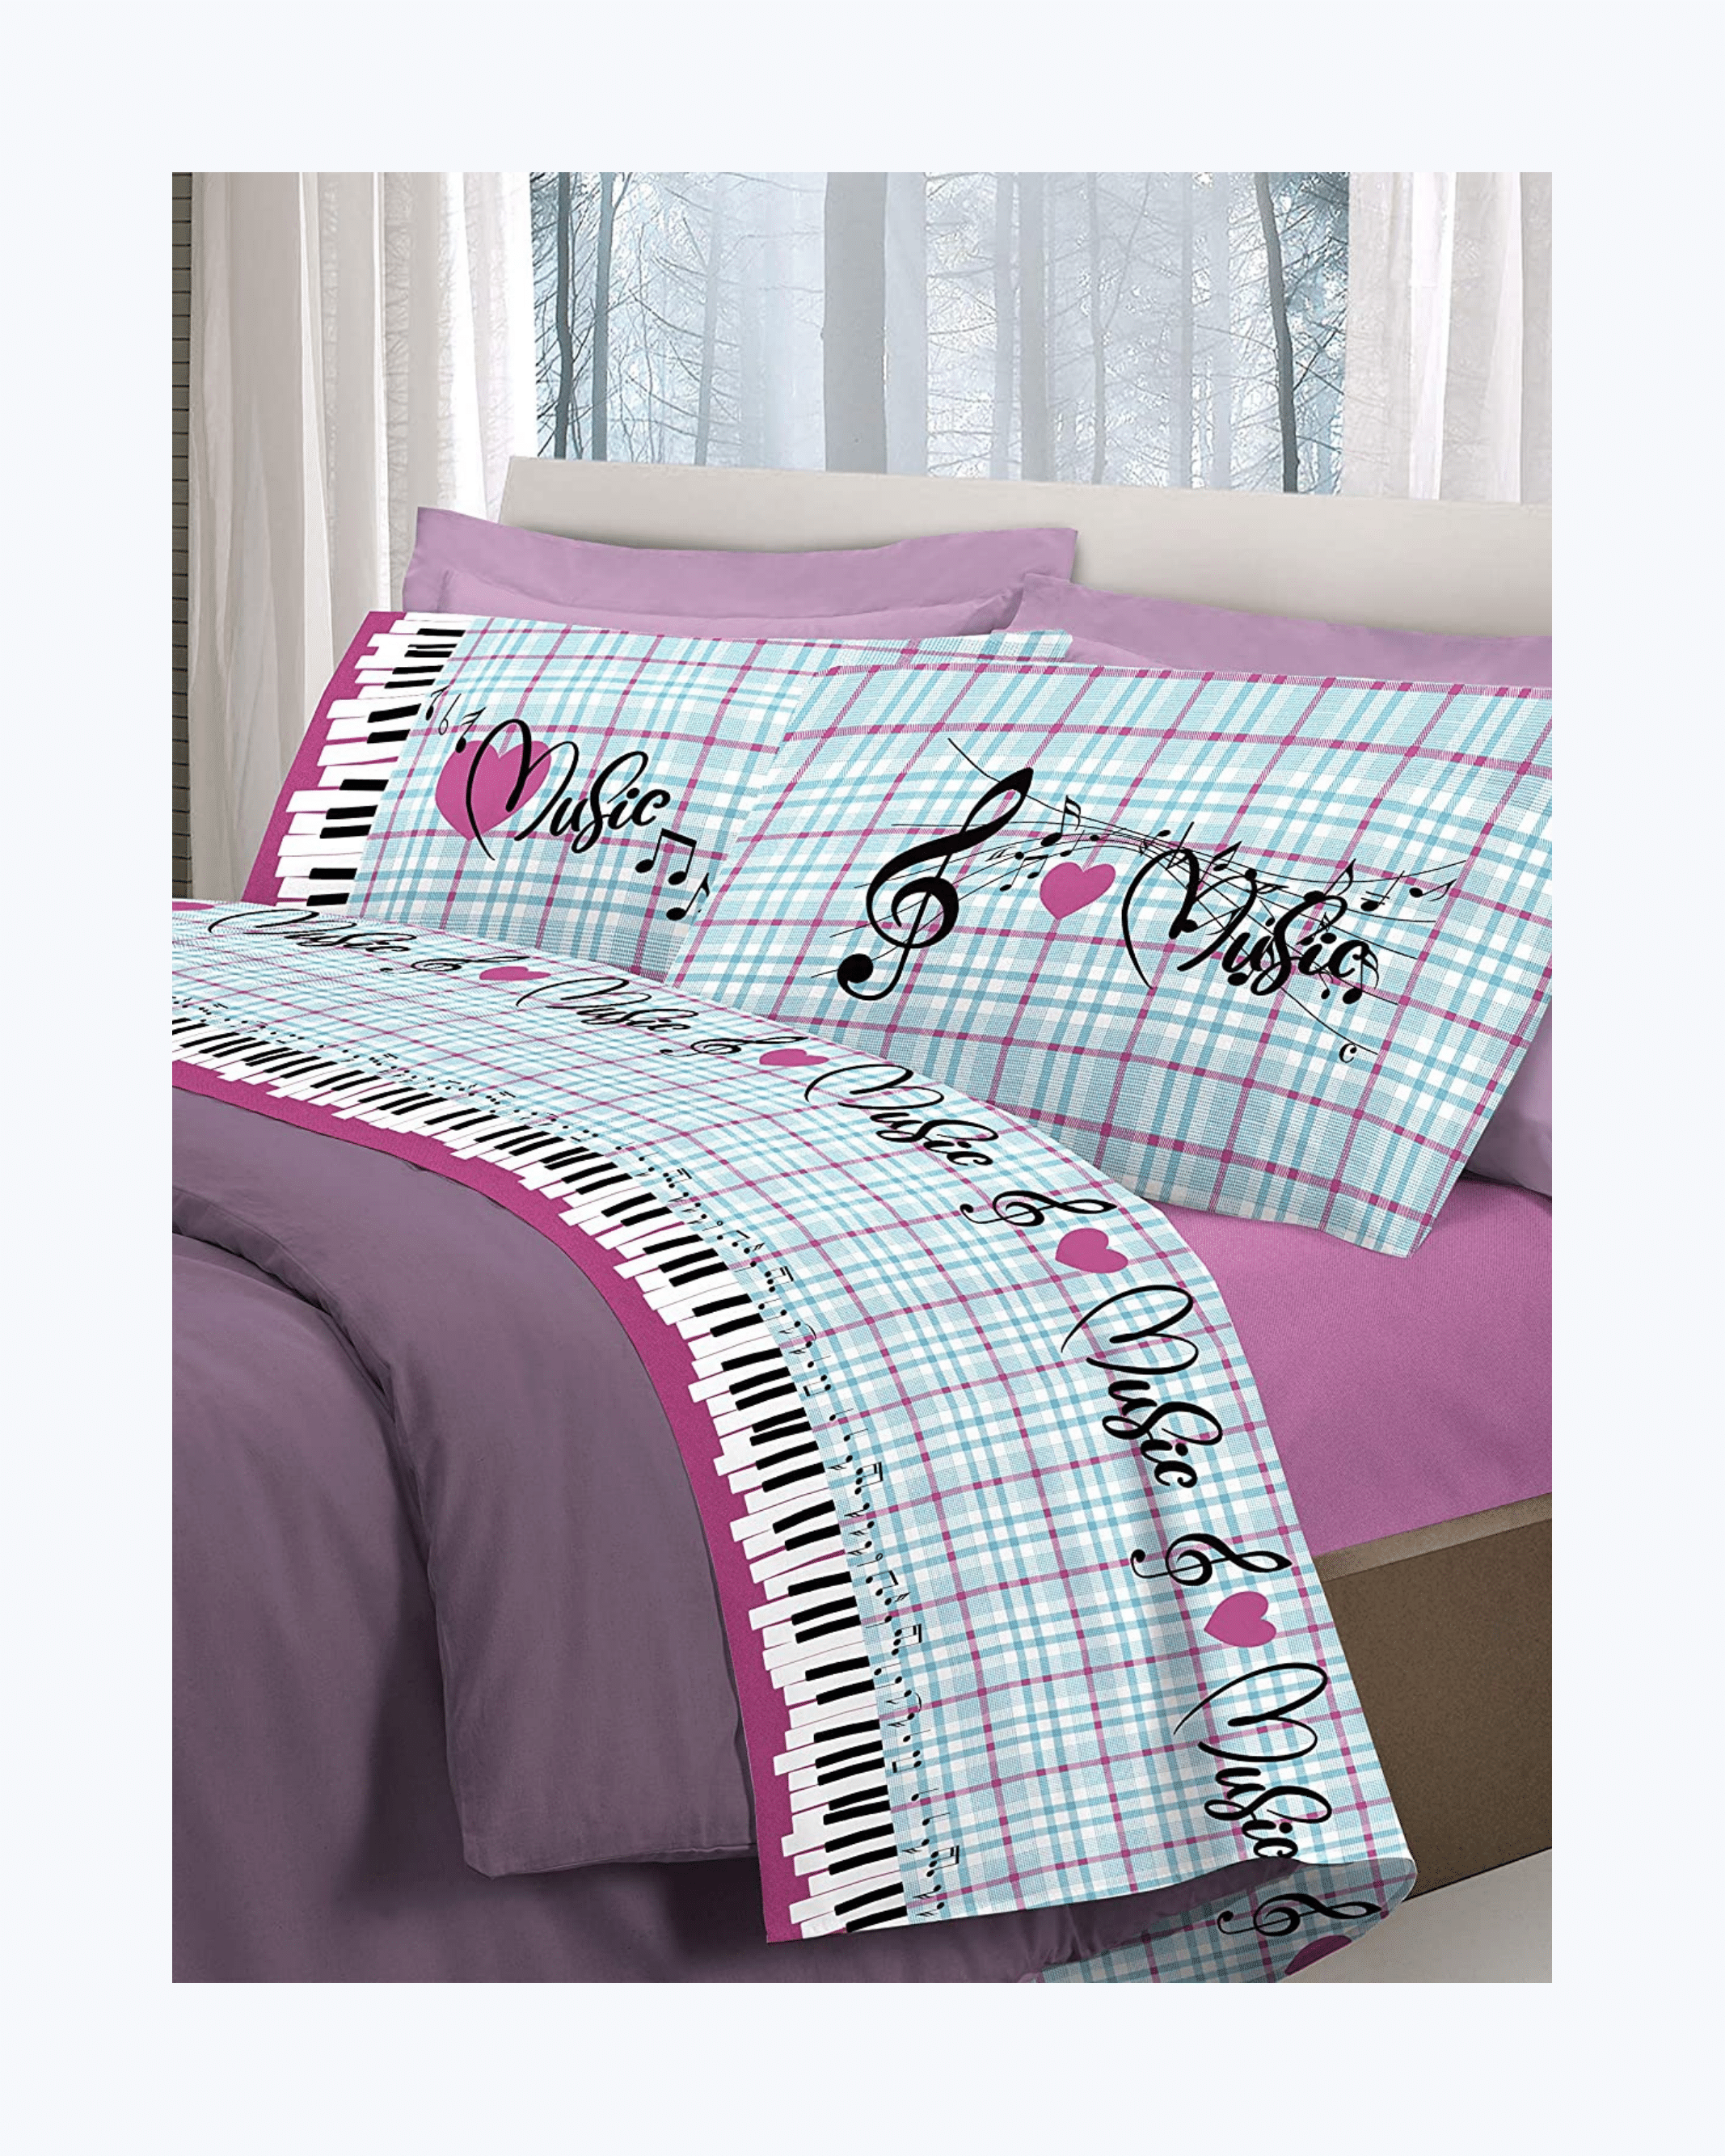 Set Lenzuola Letto in Cotone Made in Italy - Completo Letto Stampa Note Musicali Rosa